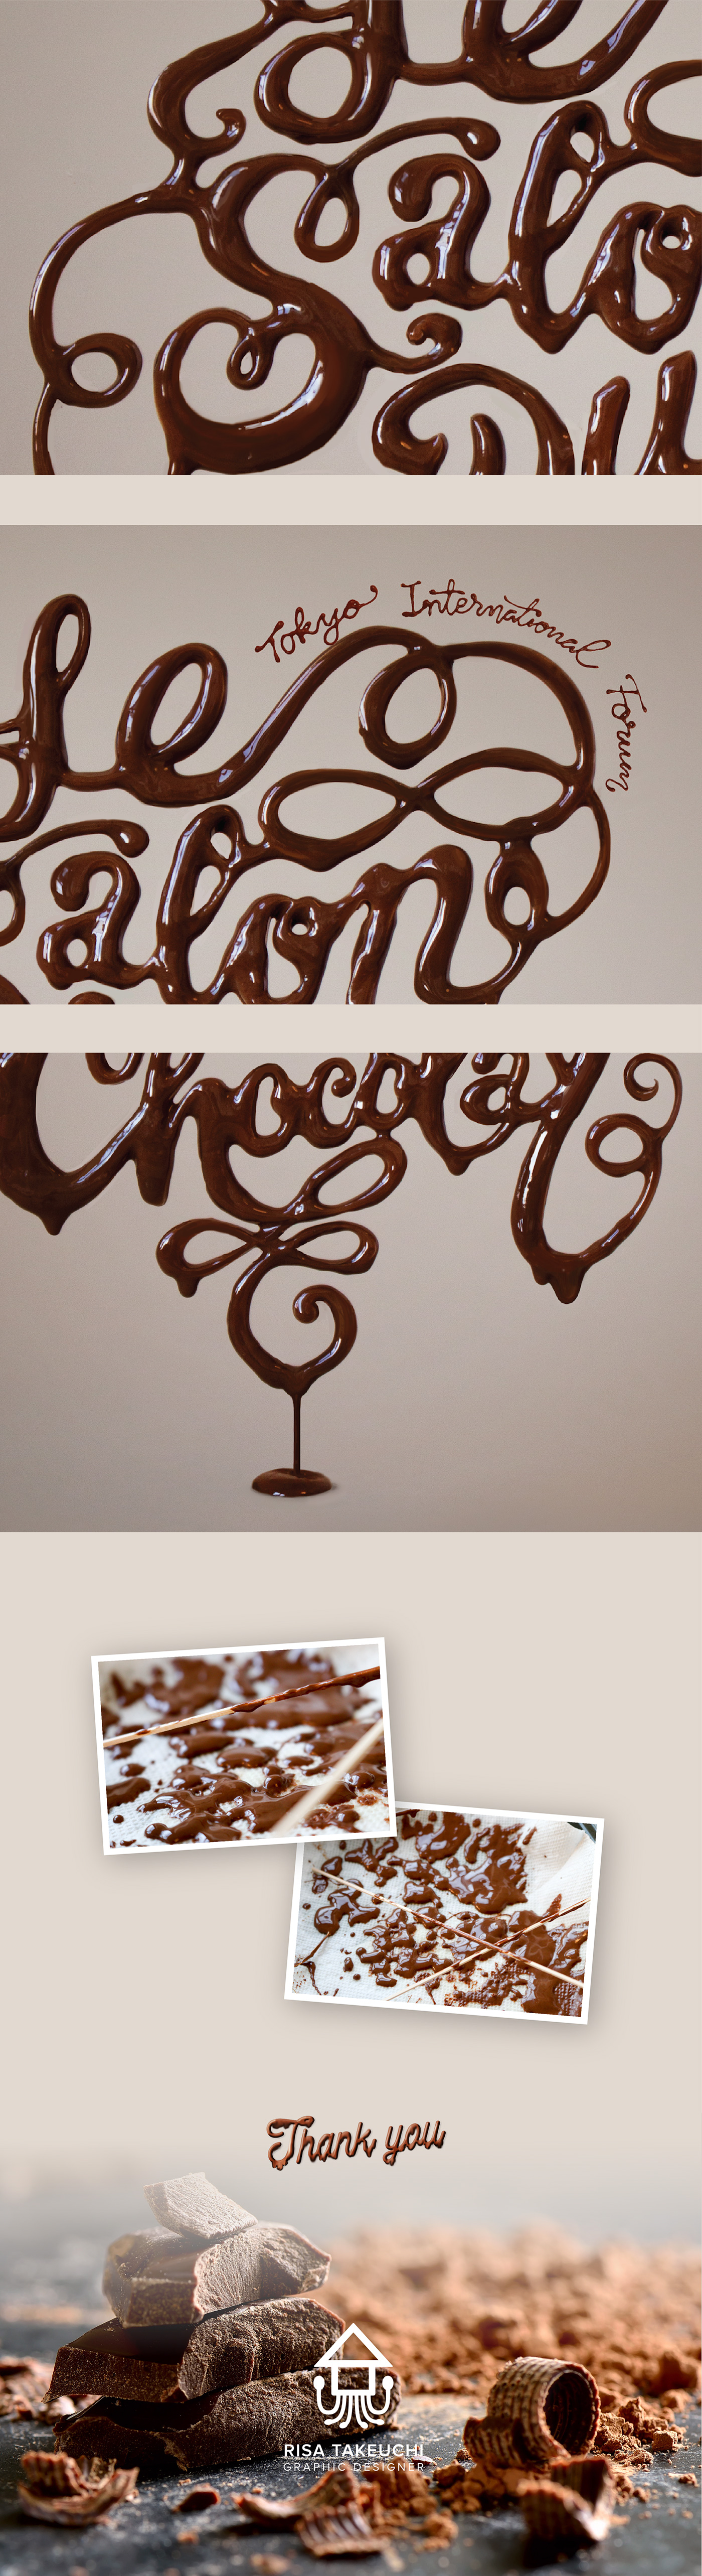 chocolate typography   design graphic poster lasercutting 3D Food  3Dimentional